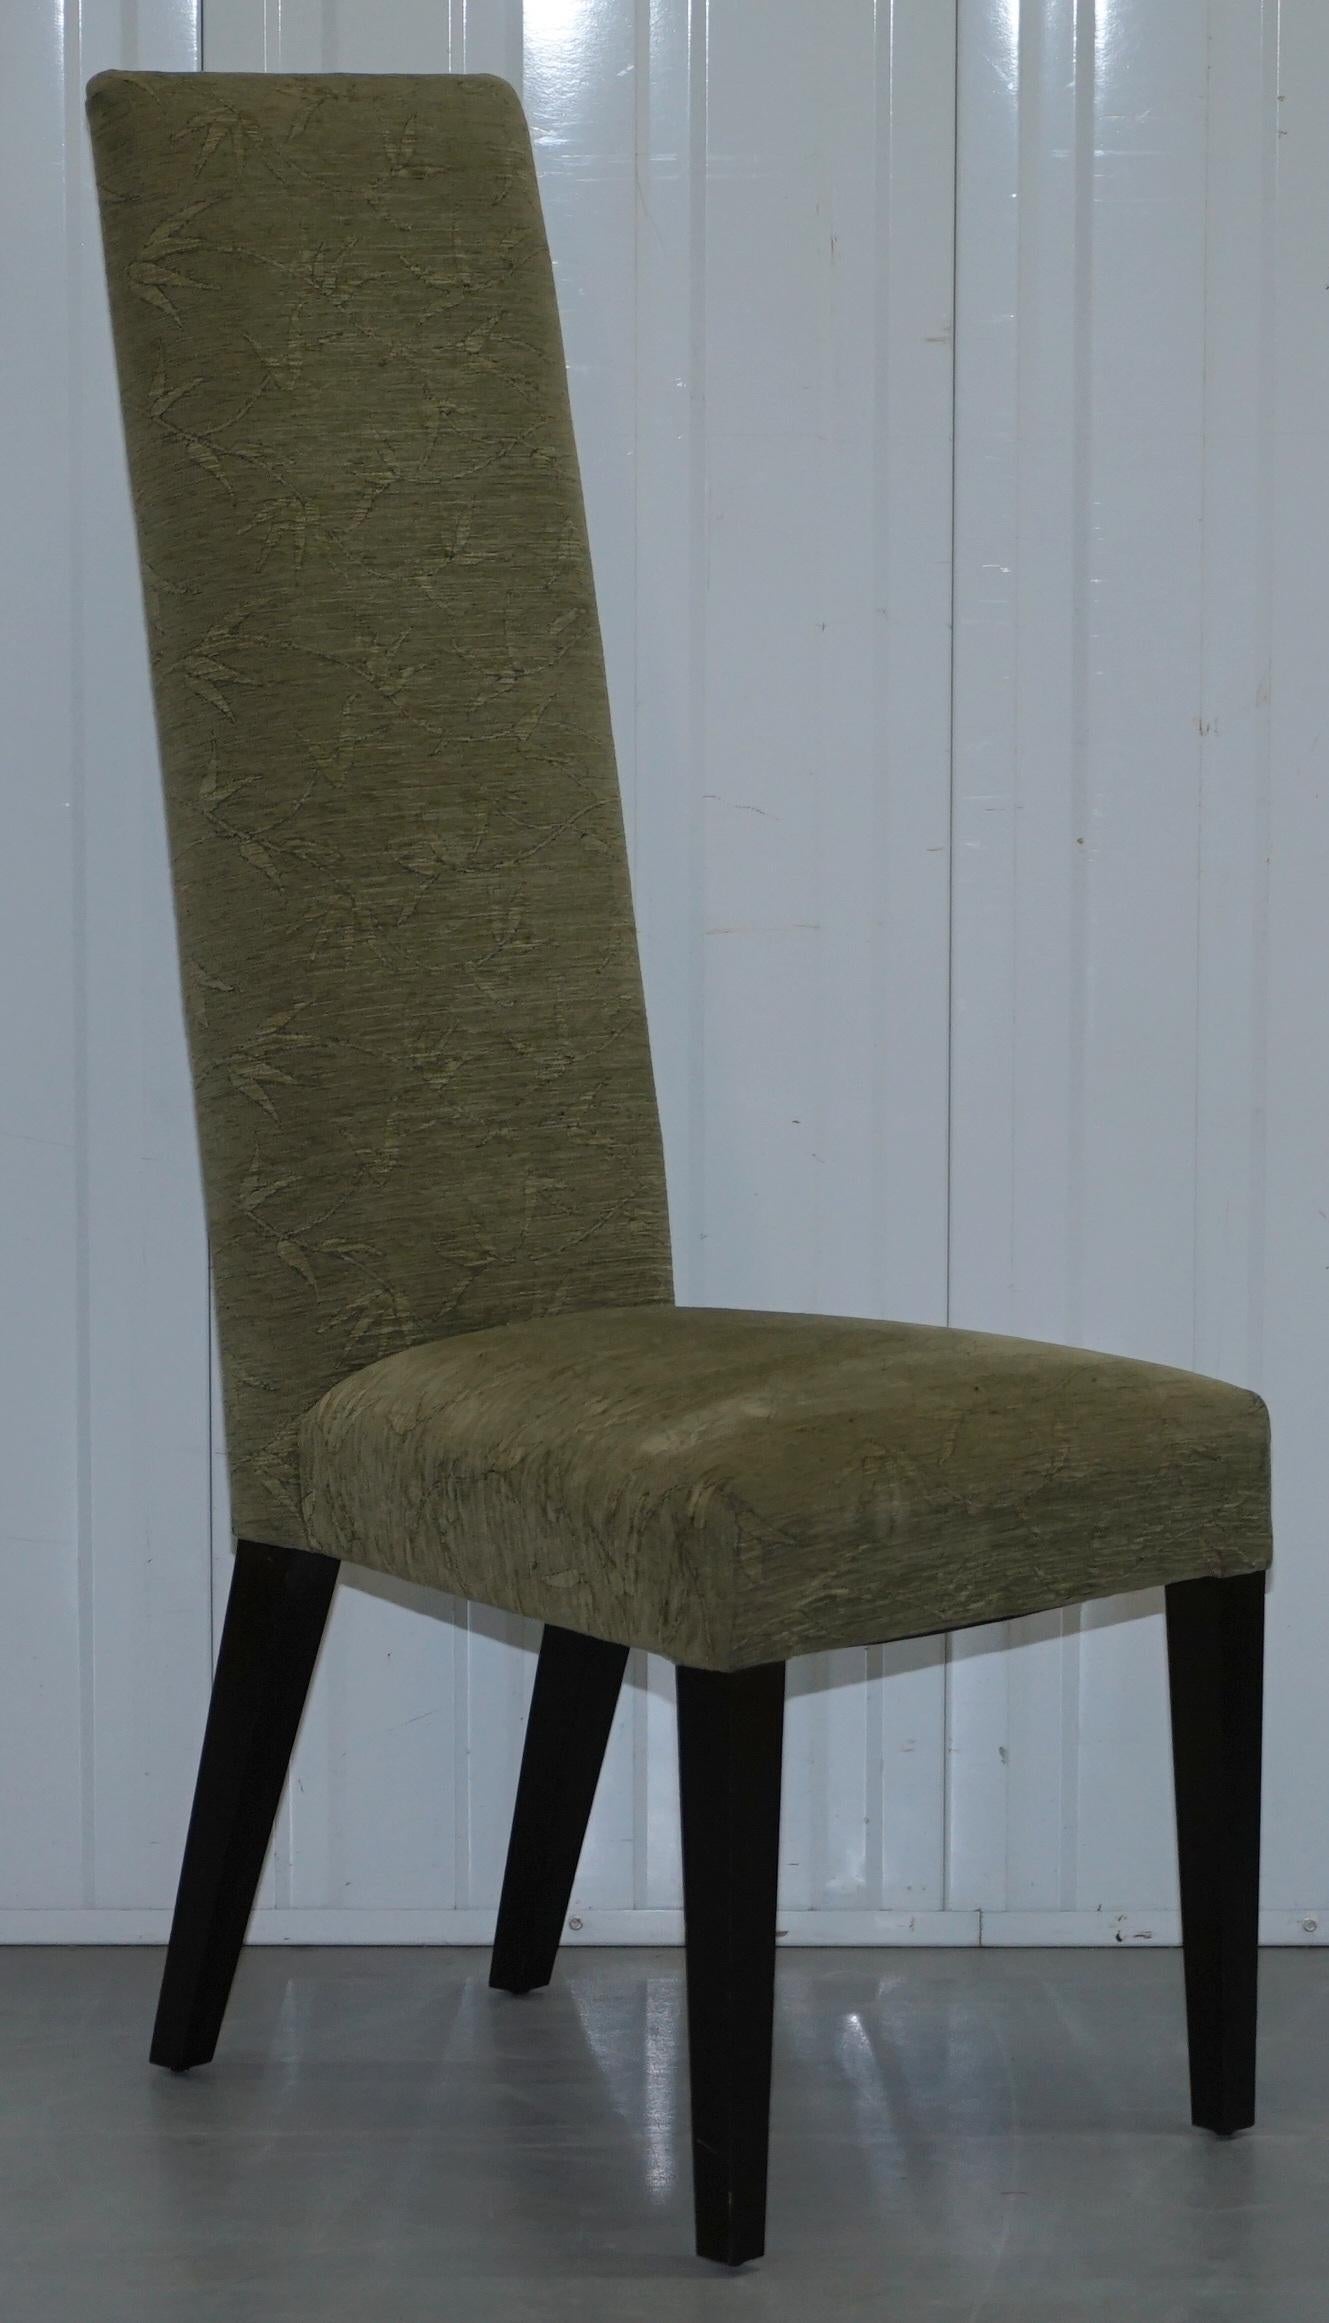 Six Laura Ashley Very High Back Dining Chairs with Green Botanical Upholstery 10